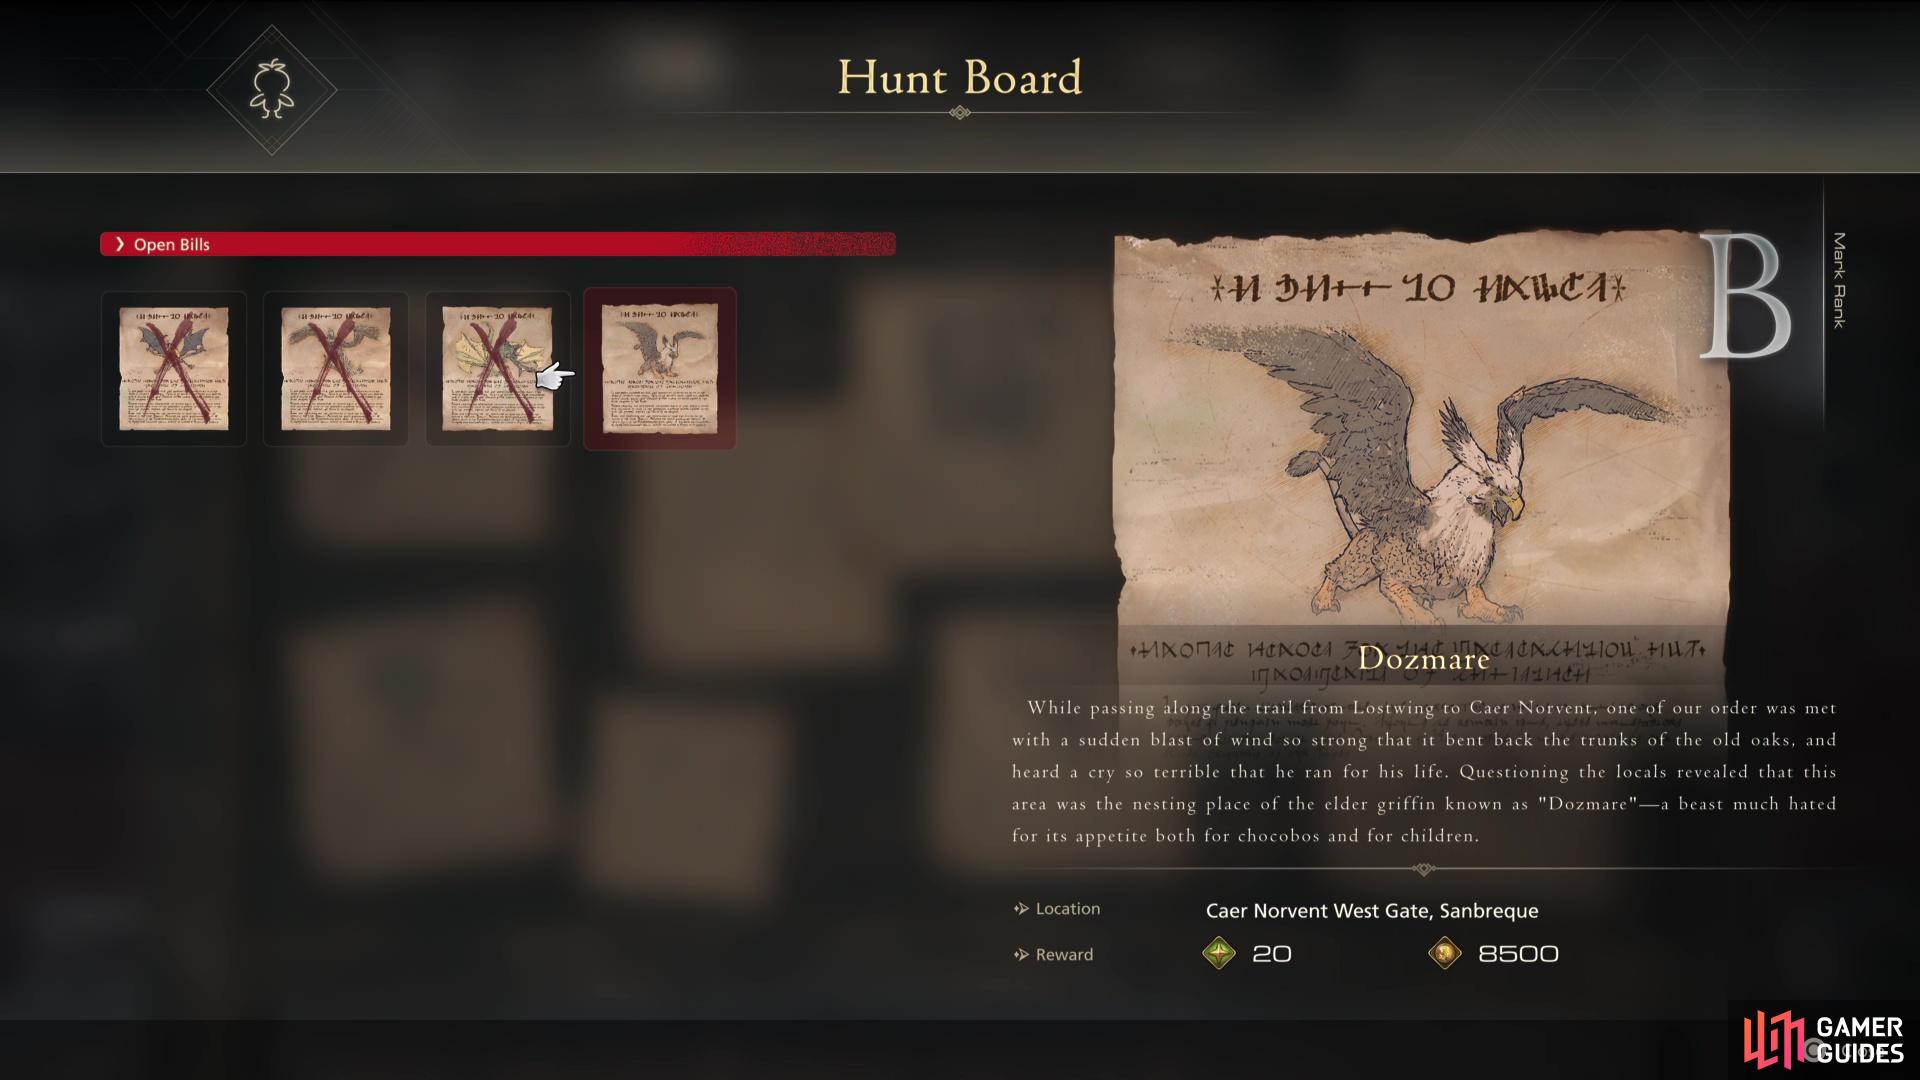 You can find the Hunt Locations by reading the Mark Bills on the Hunt Board